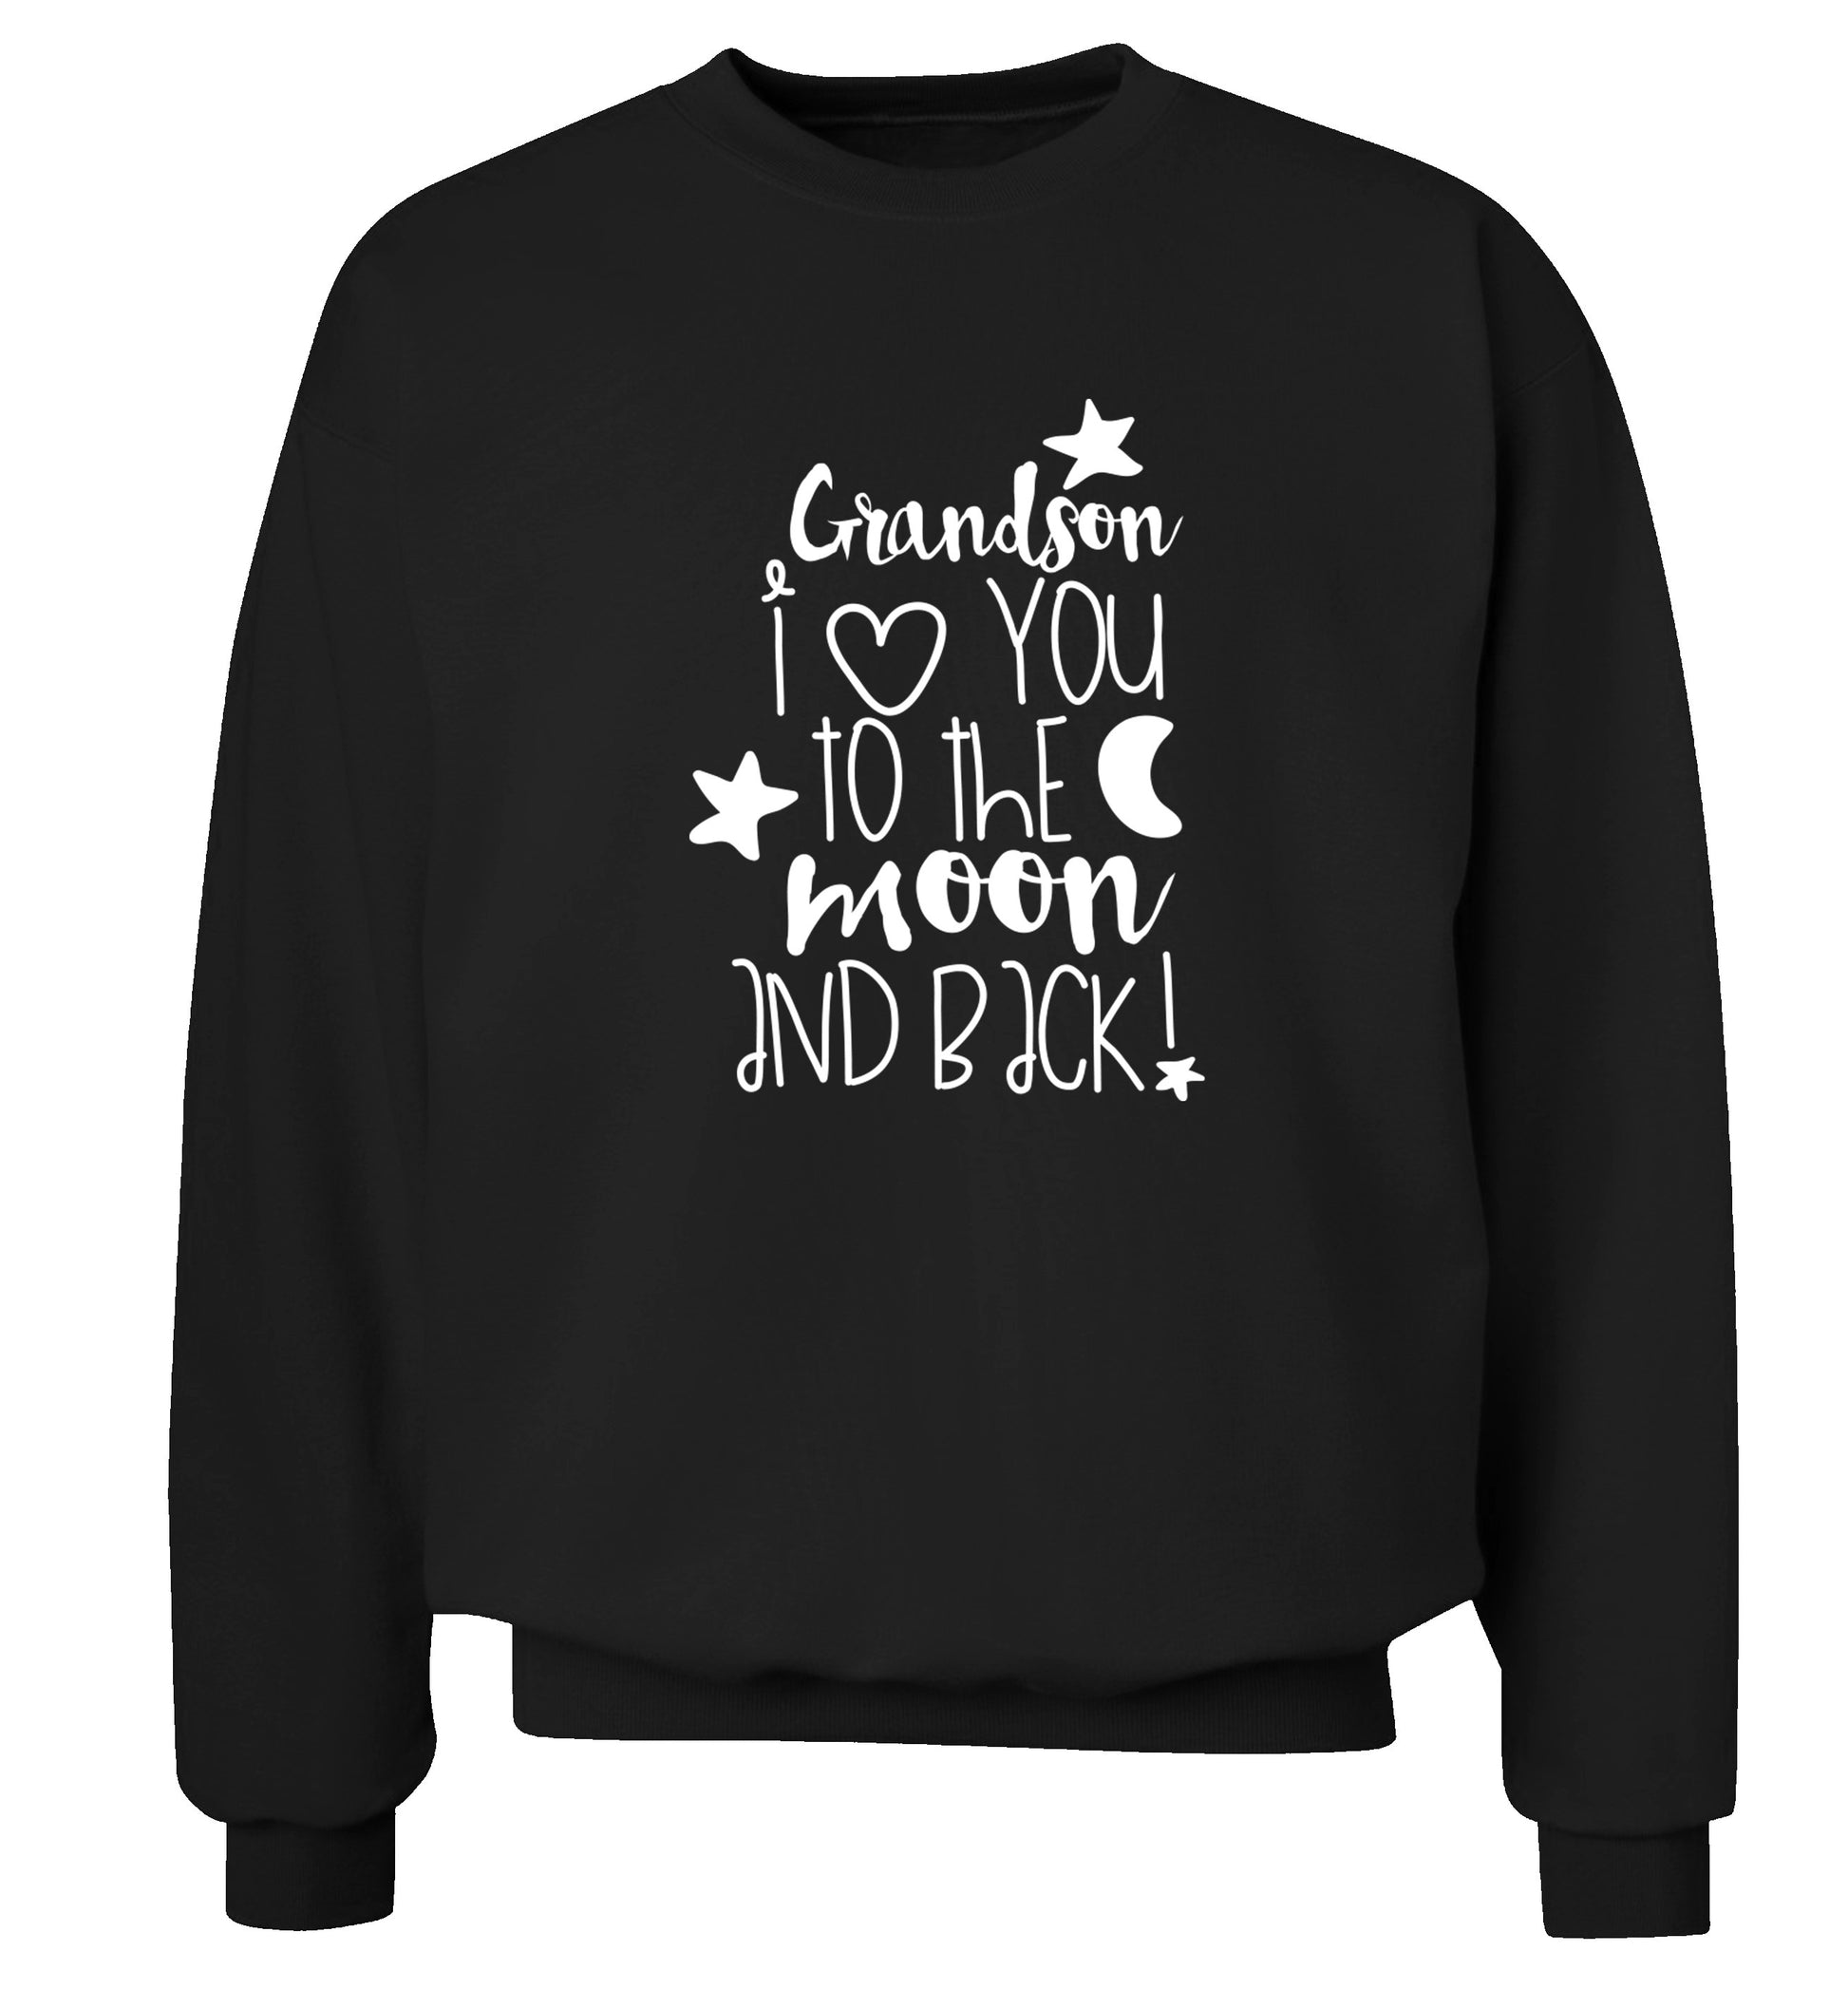 Grandson I love you to the moon and back Adult's unisex black  sweater 2XL